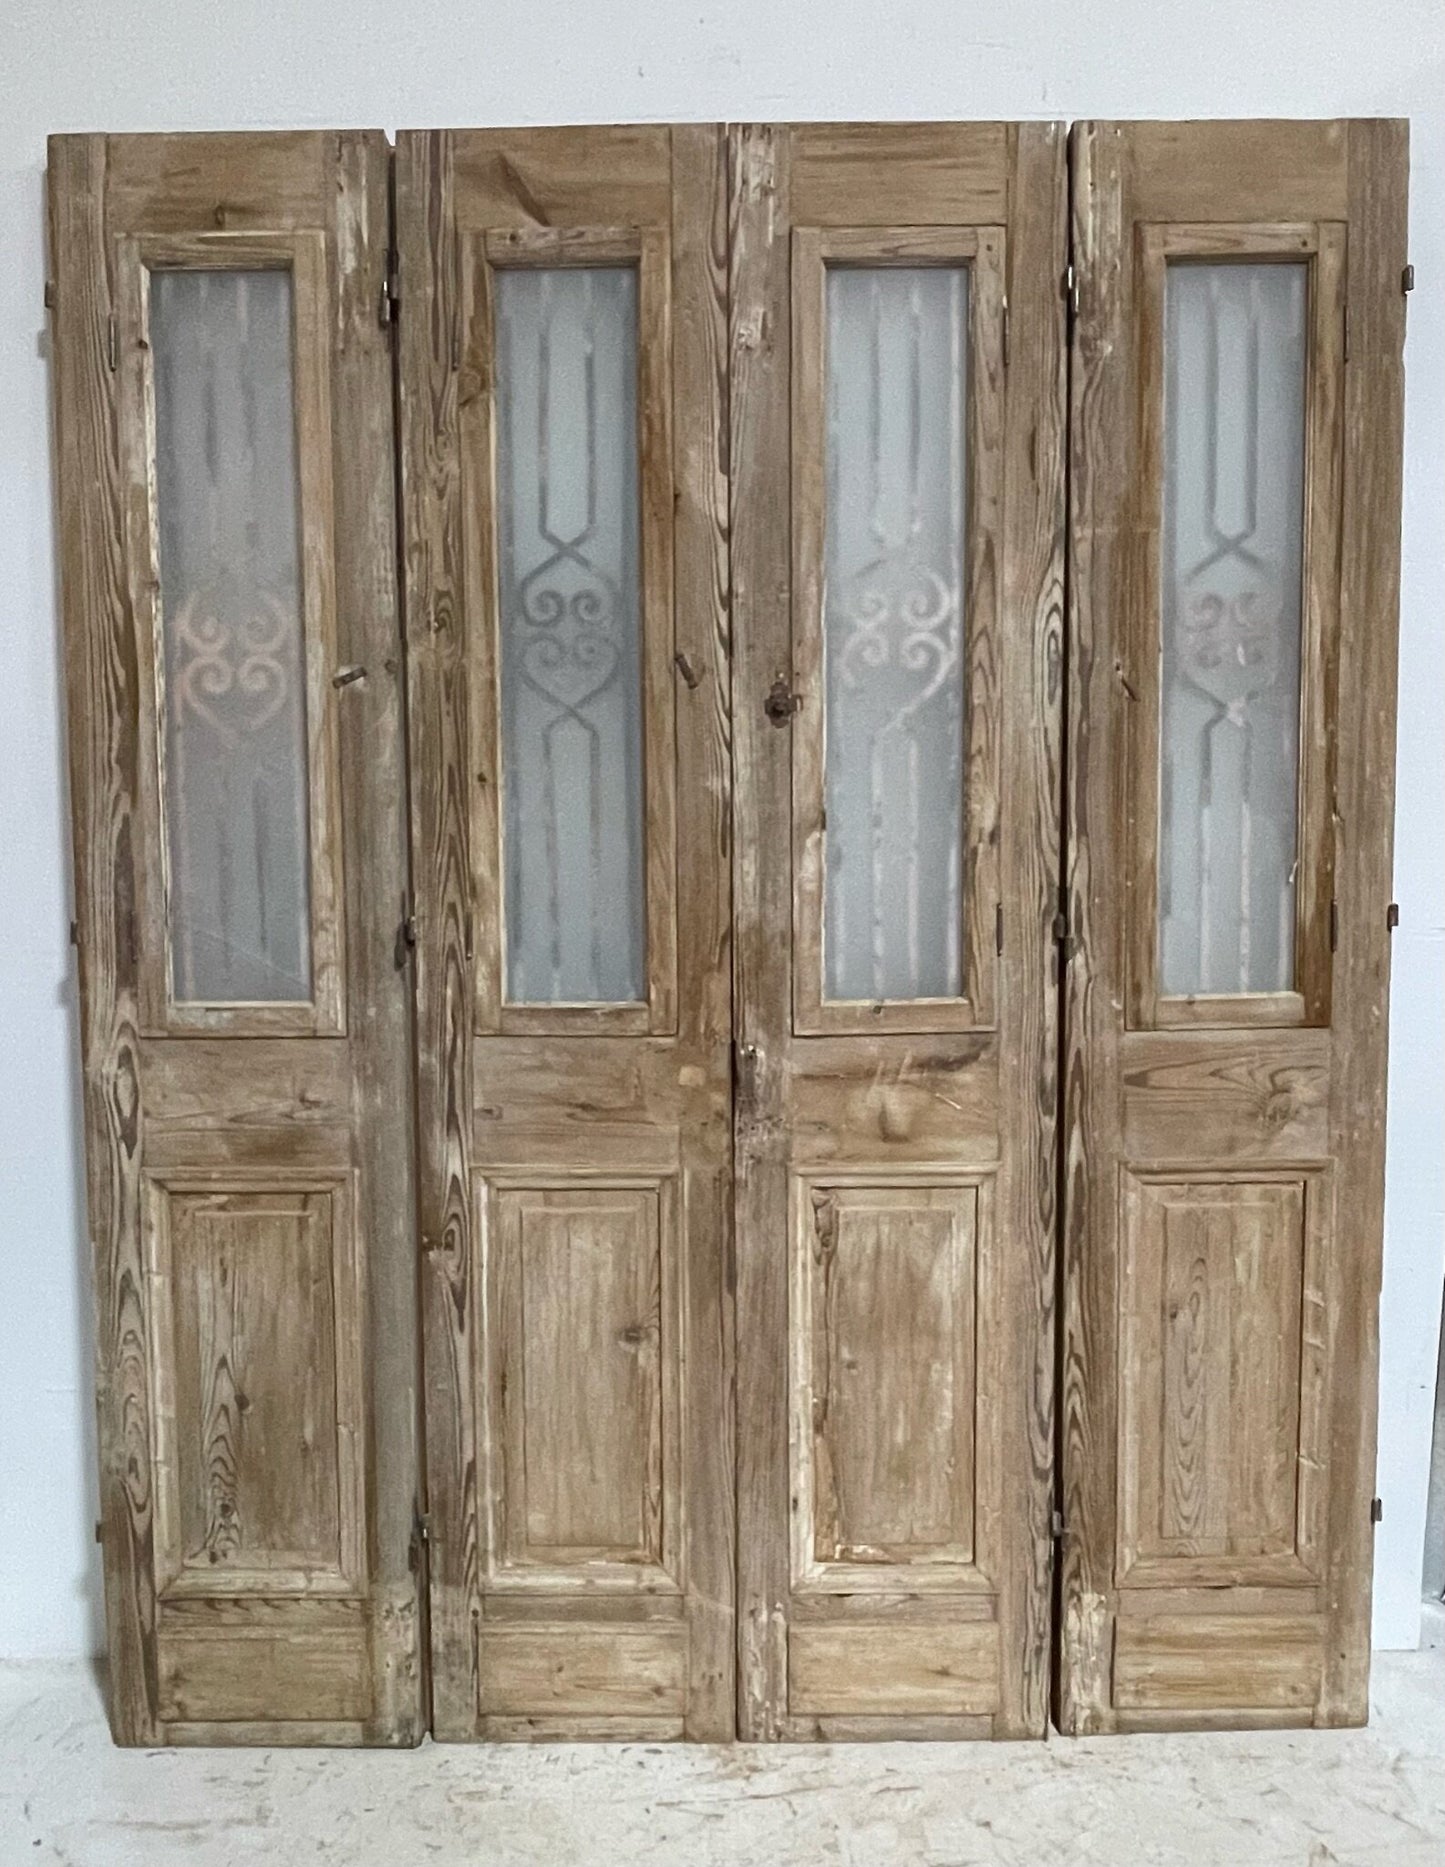 Antique French doors (94.5x76.25) with metal G1276